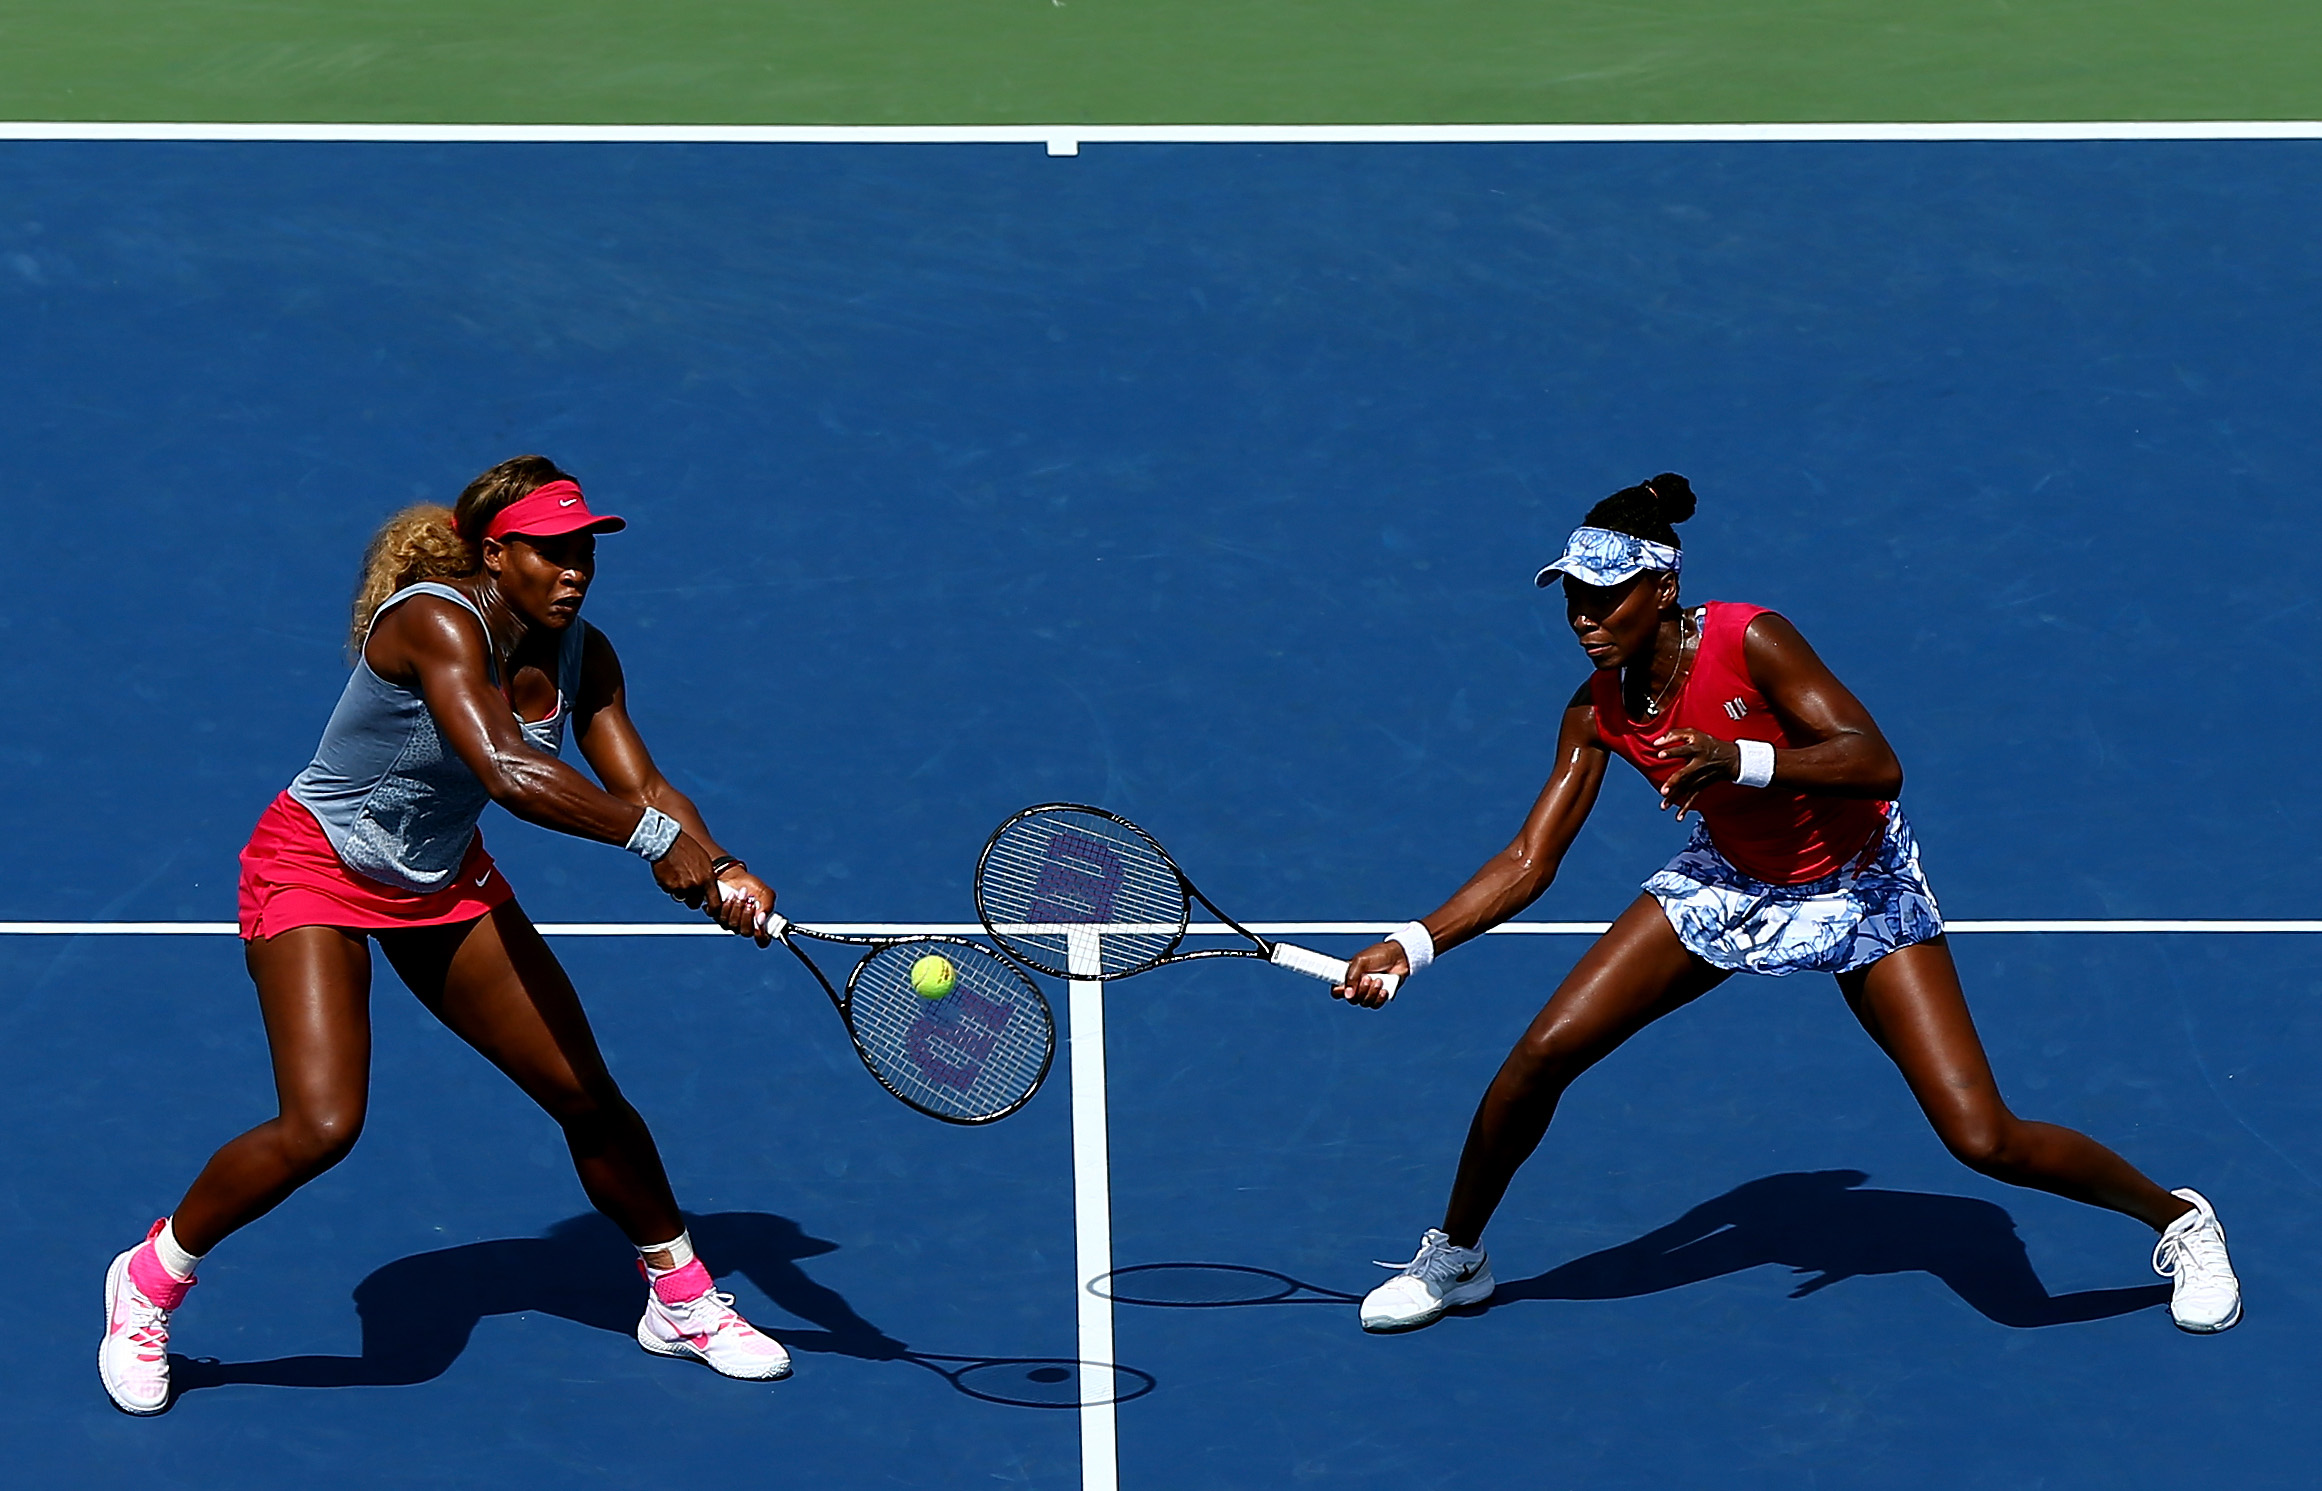 Venus Williams (R) and Serena Williams (L) of the United States return a shot against Ekaterina Makarova and Elena Vesnina of Russia during their women's doubles quarterfinal match on Day Nine of the 2014 US Open at the USTA Billie Jean King National Tennis Center on September 2, 2014 in the Flushing neighborhood of the Queens borough of New York City. (Elsa&mdash;Getty Images)